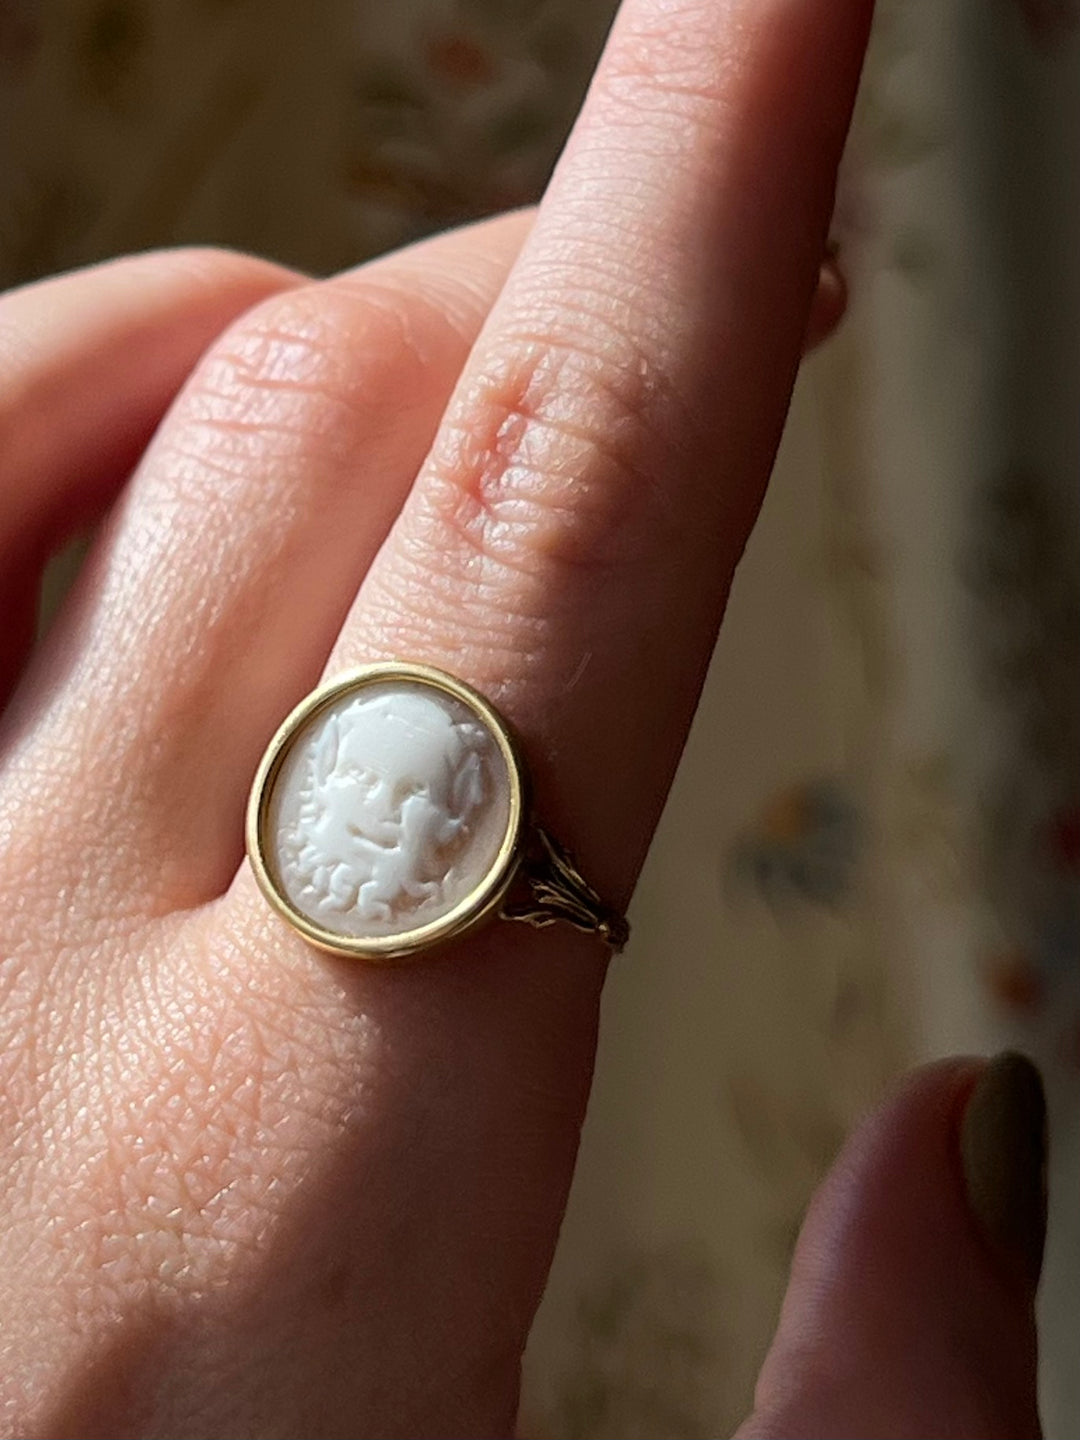 Superb 18ct Pan or Satyr Cameo Ring c 1830 French